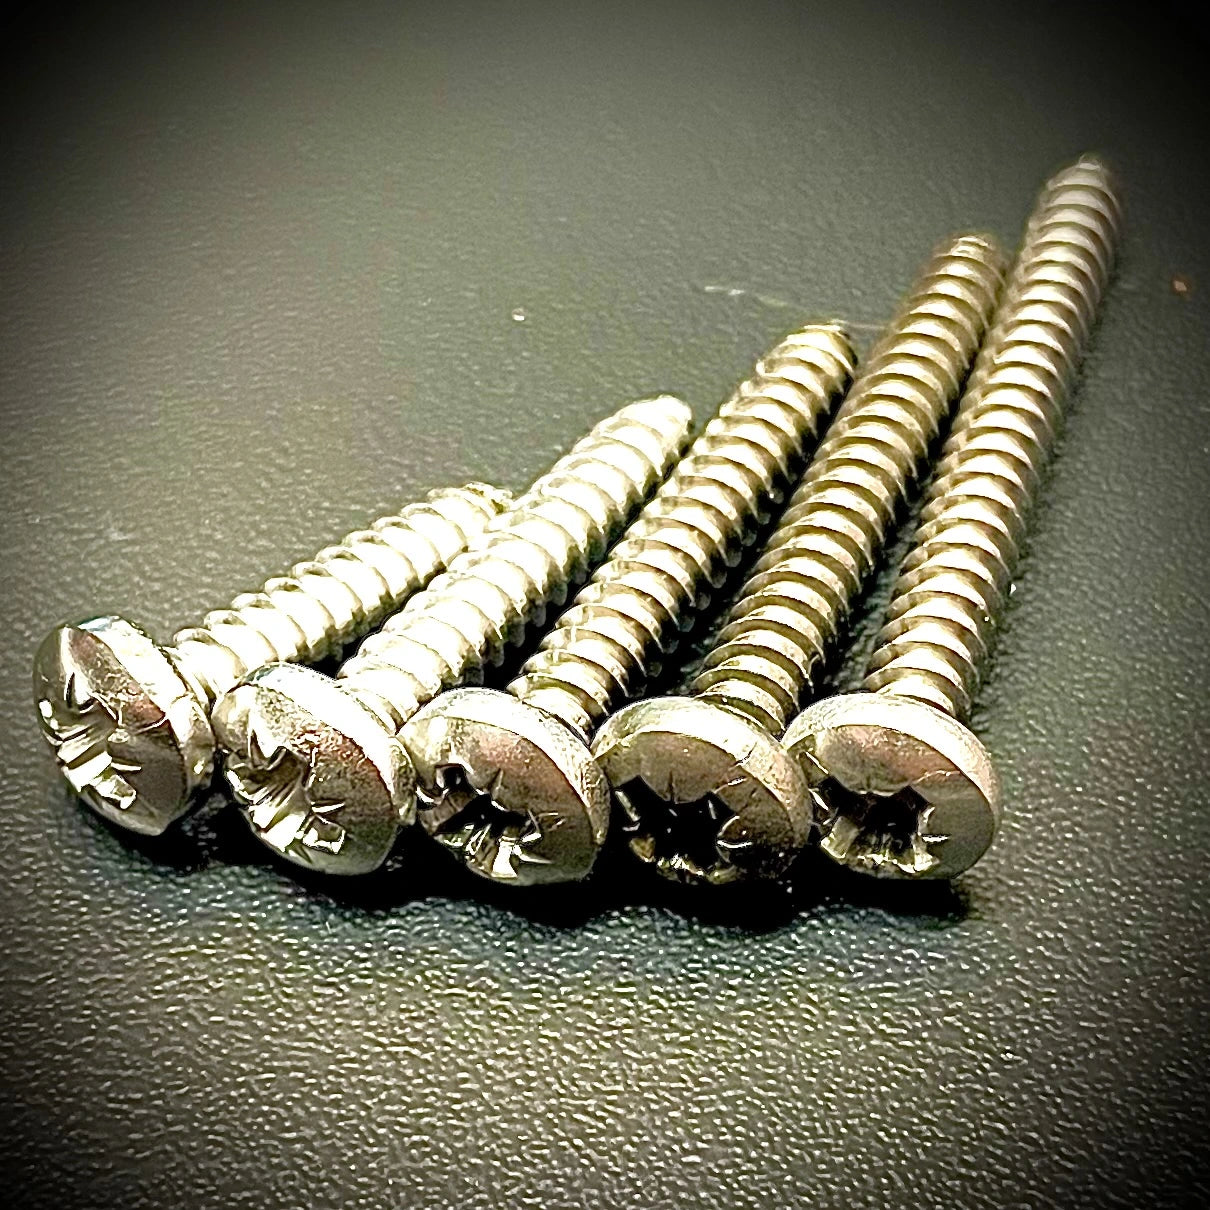 No. 4 2.9mm Pozi Pan Self Tapping Screws AB Point A2/304 Stainless - Fixaball Ltd. Fixings and Fasteners UK